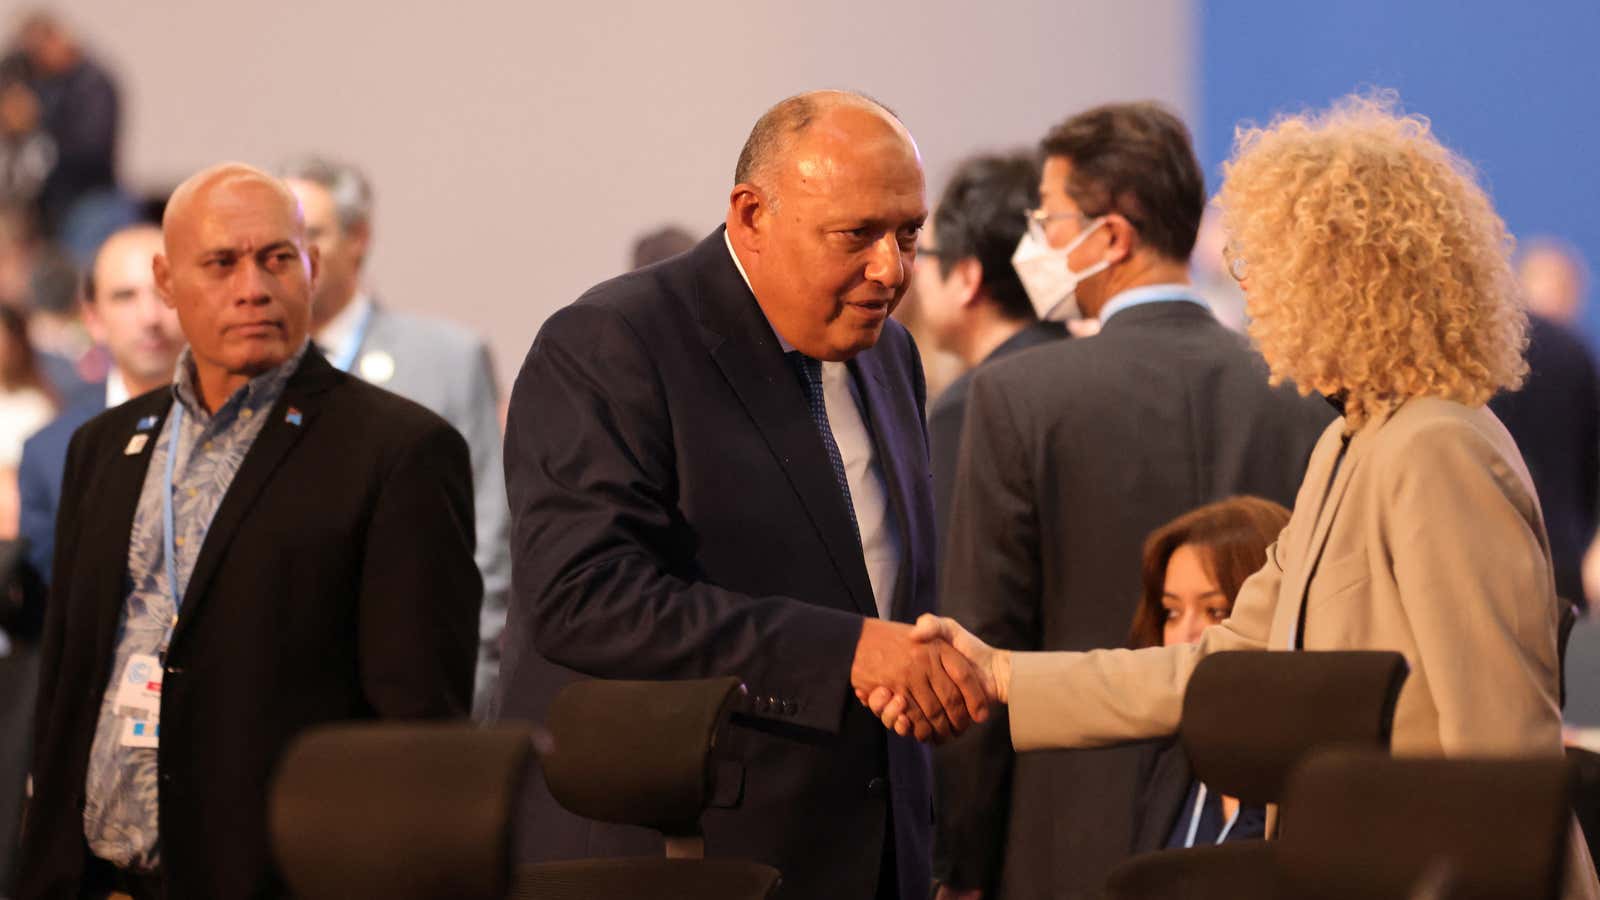 COP27 president Sameh Shoukry greets German climate envoy Jennifer Morgan during the closing hours of the summit.